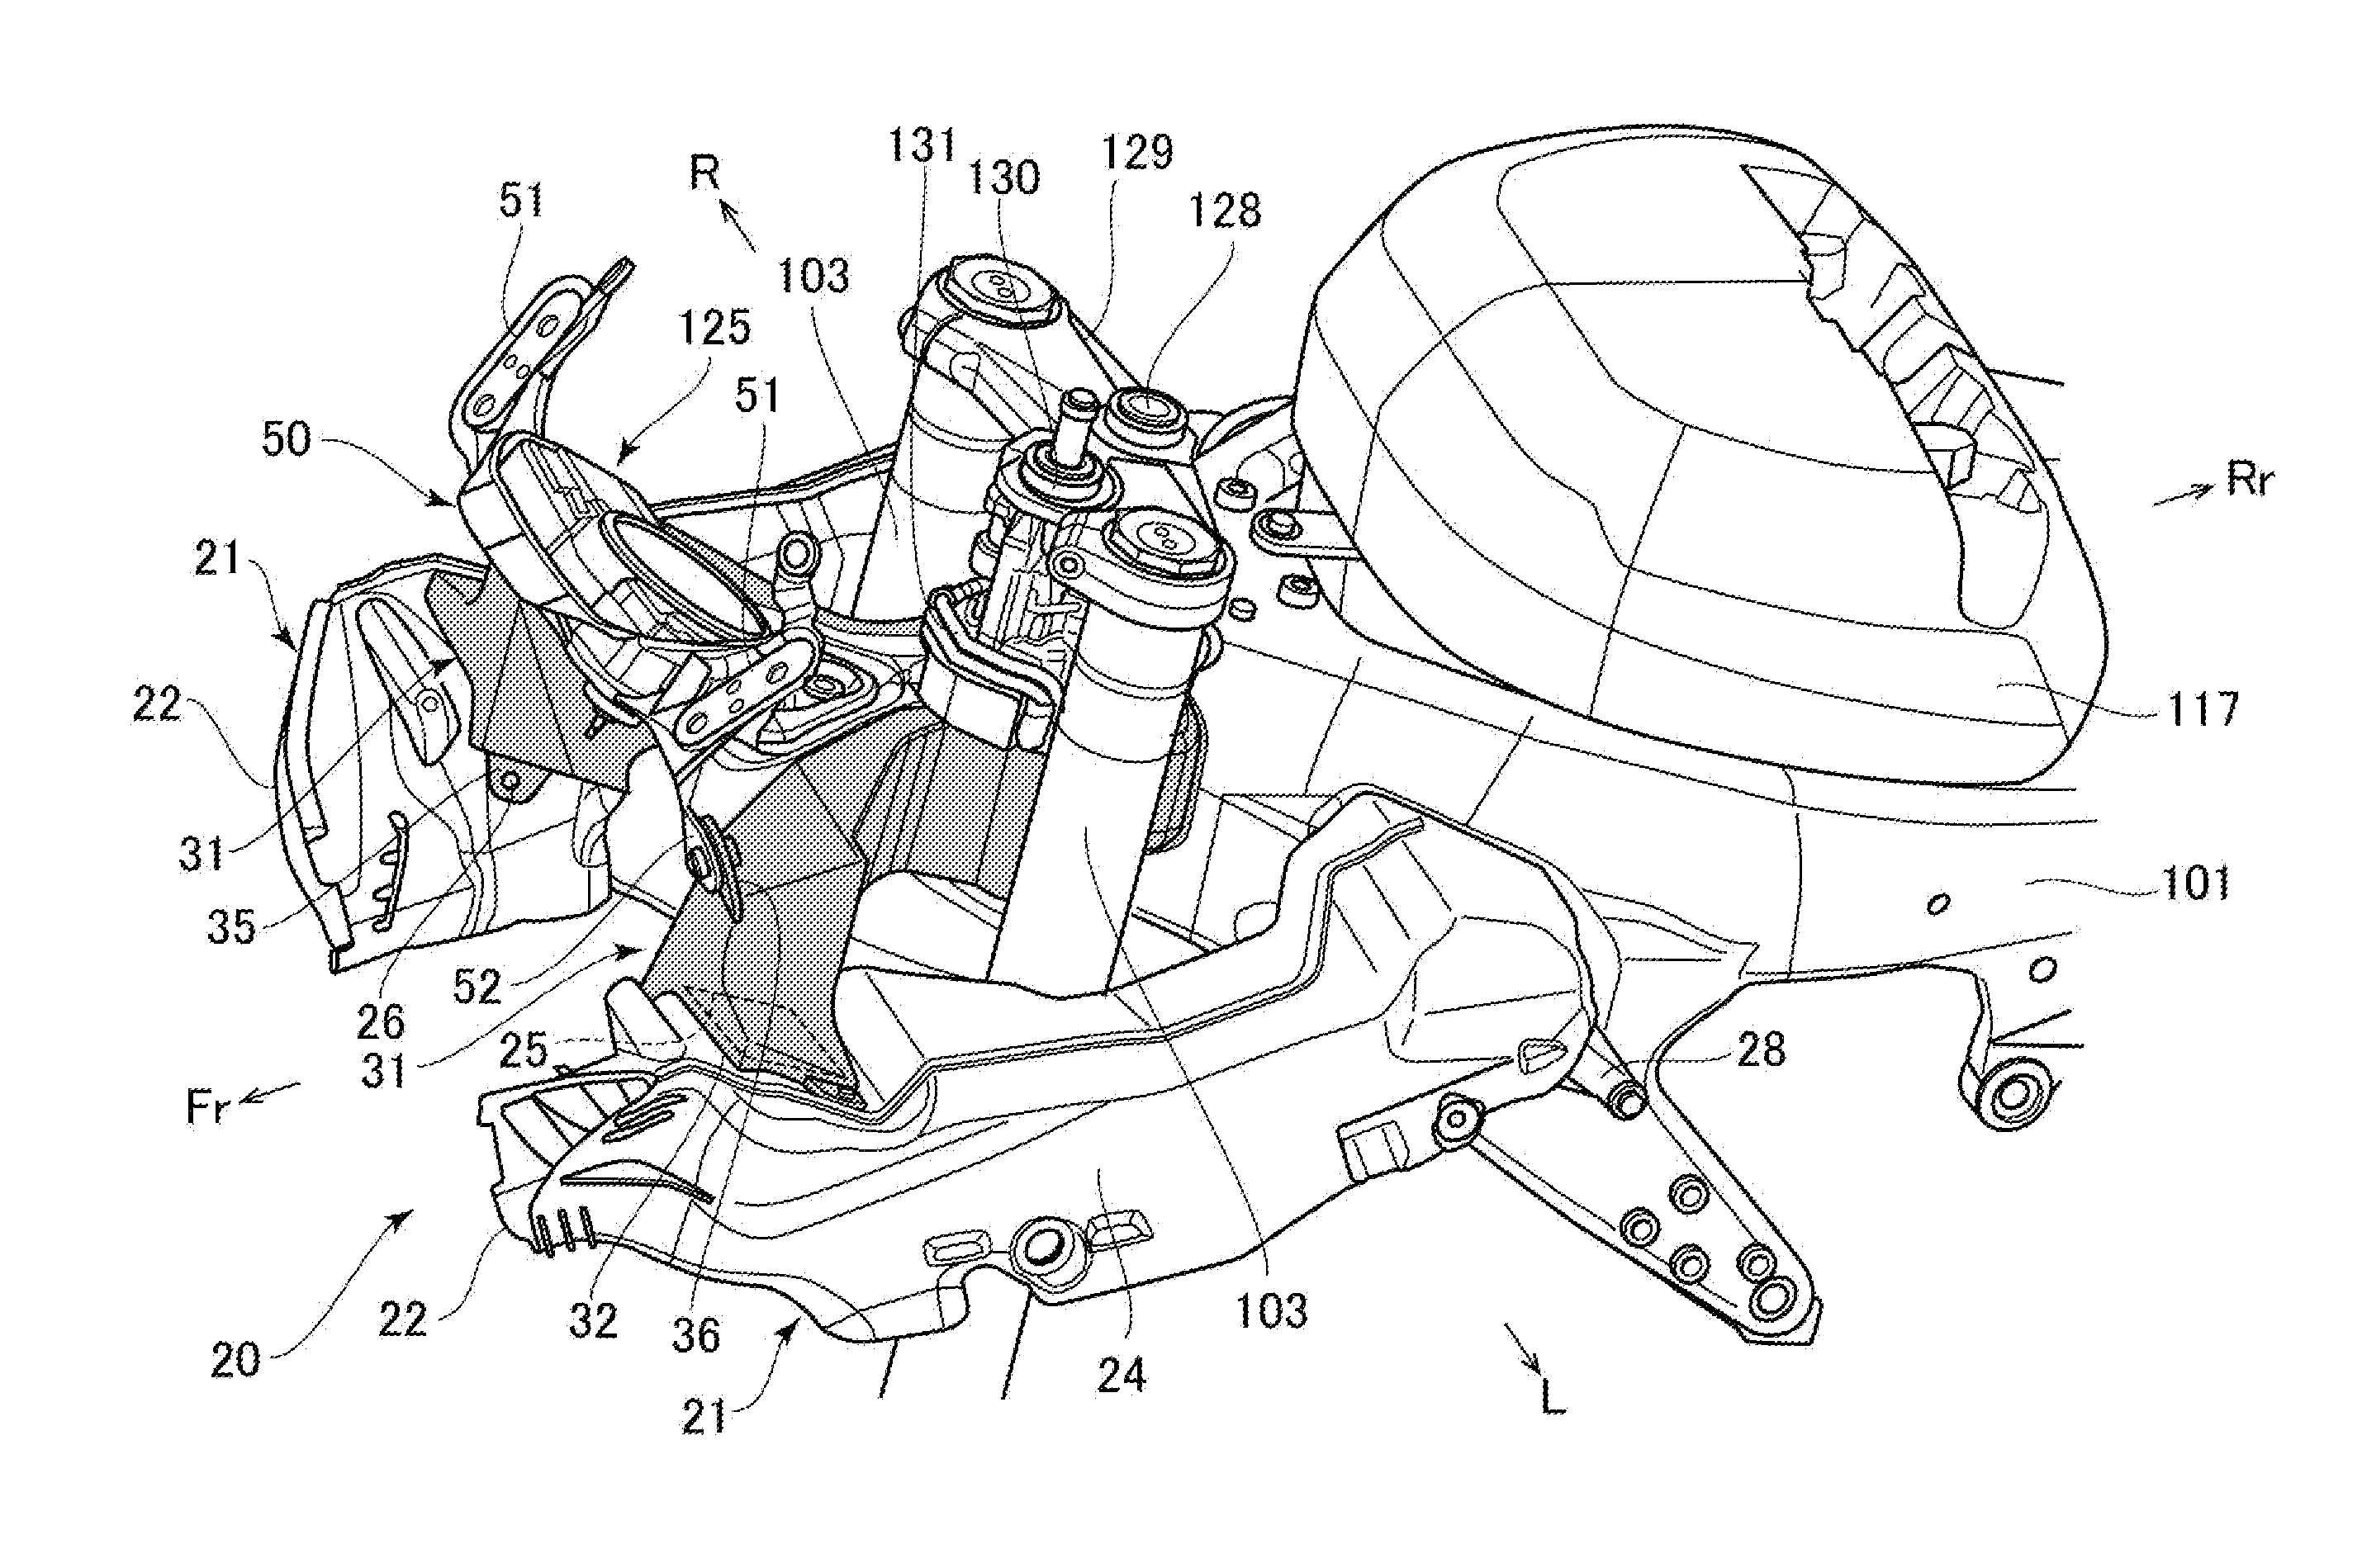 Air intake structure for saddle-ride type vehicle